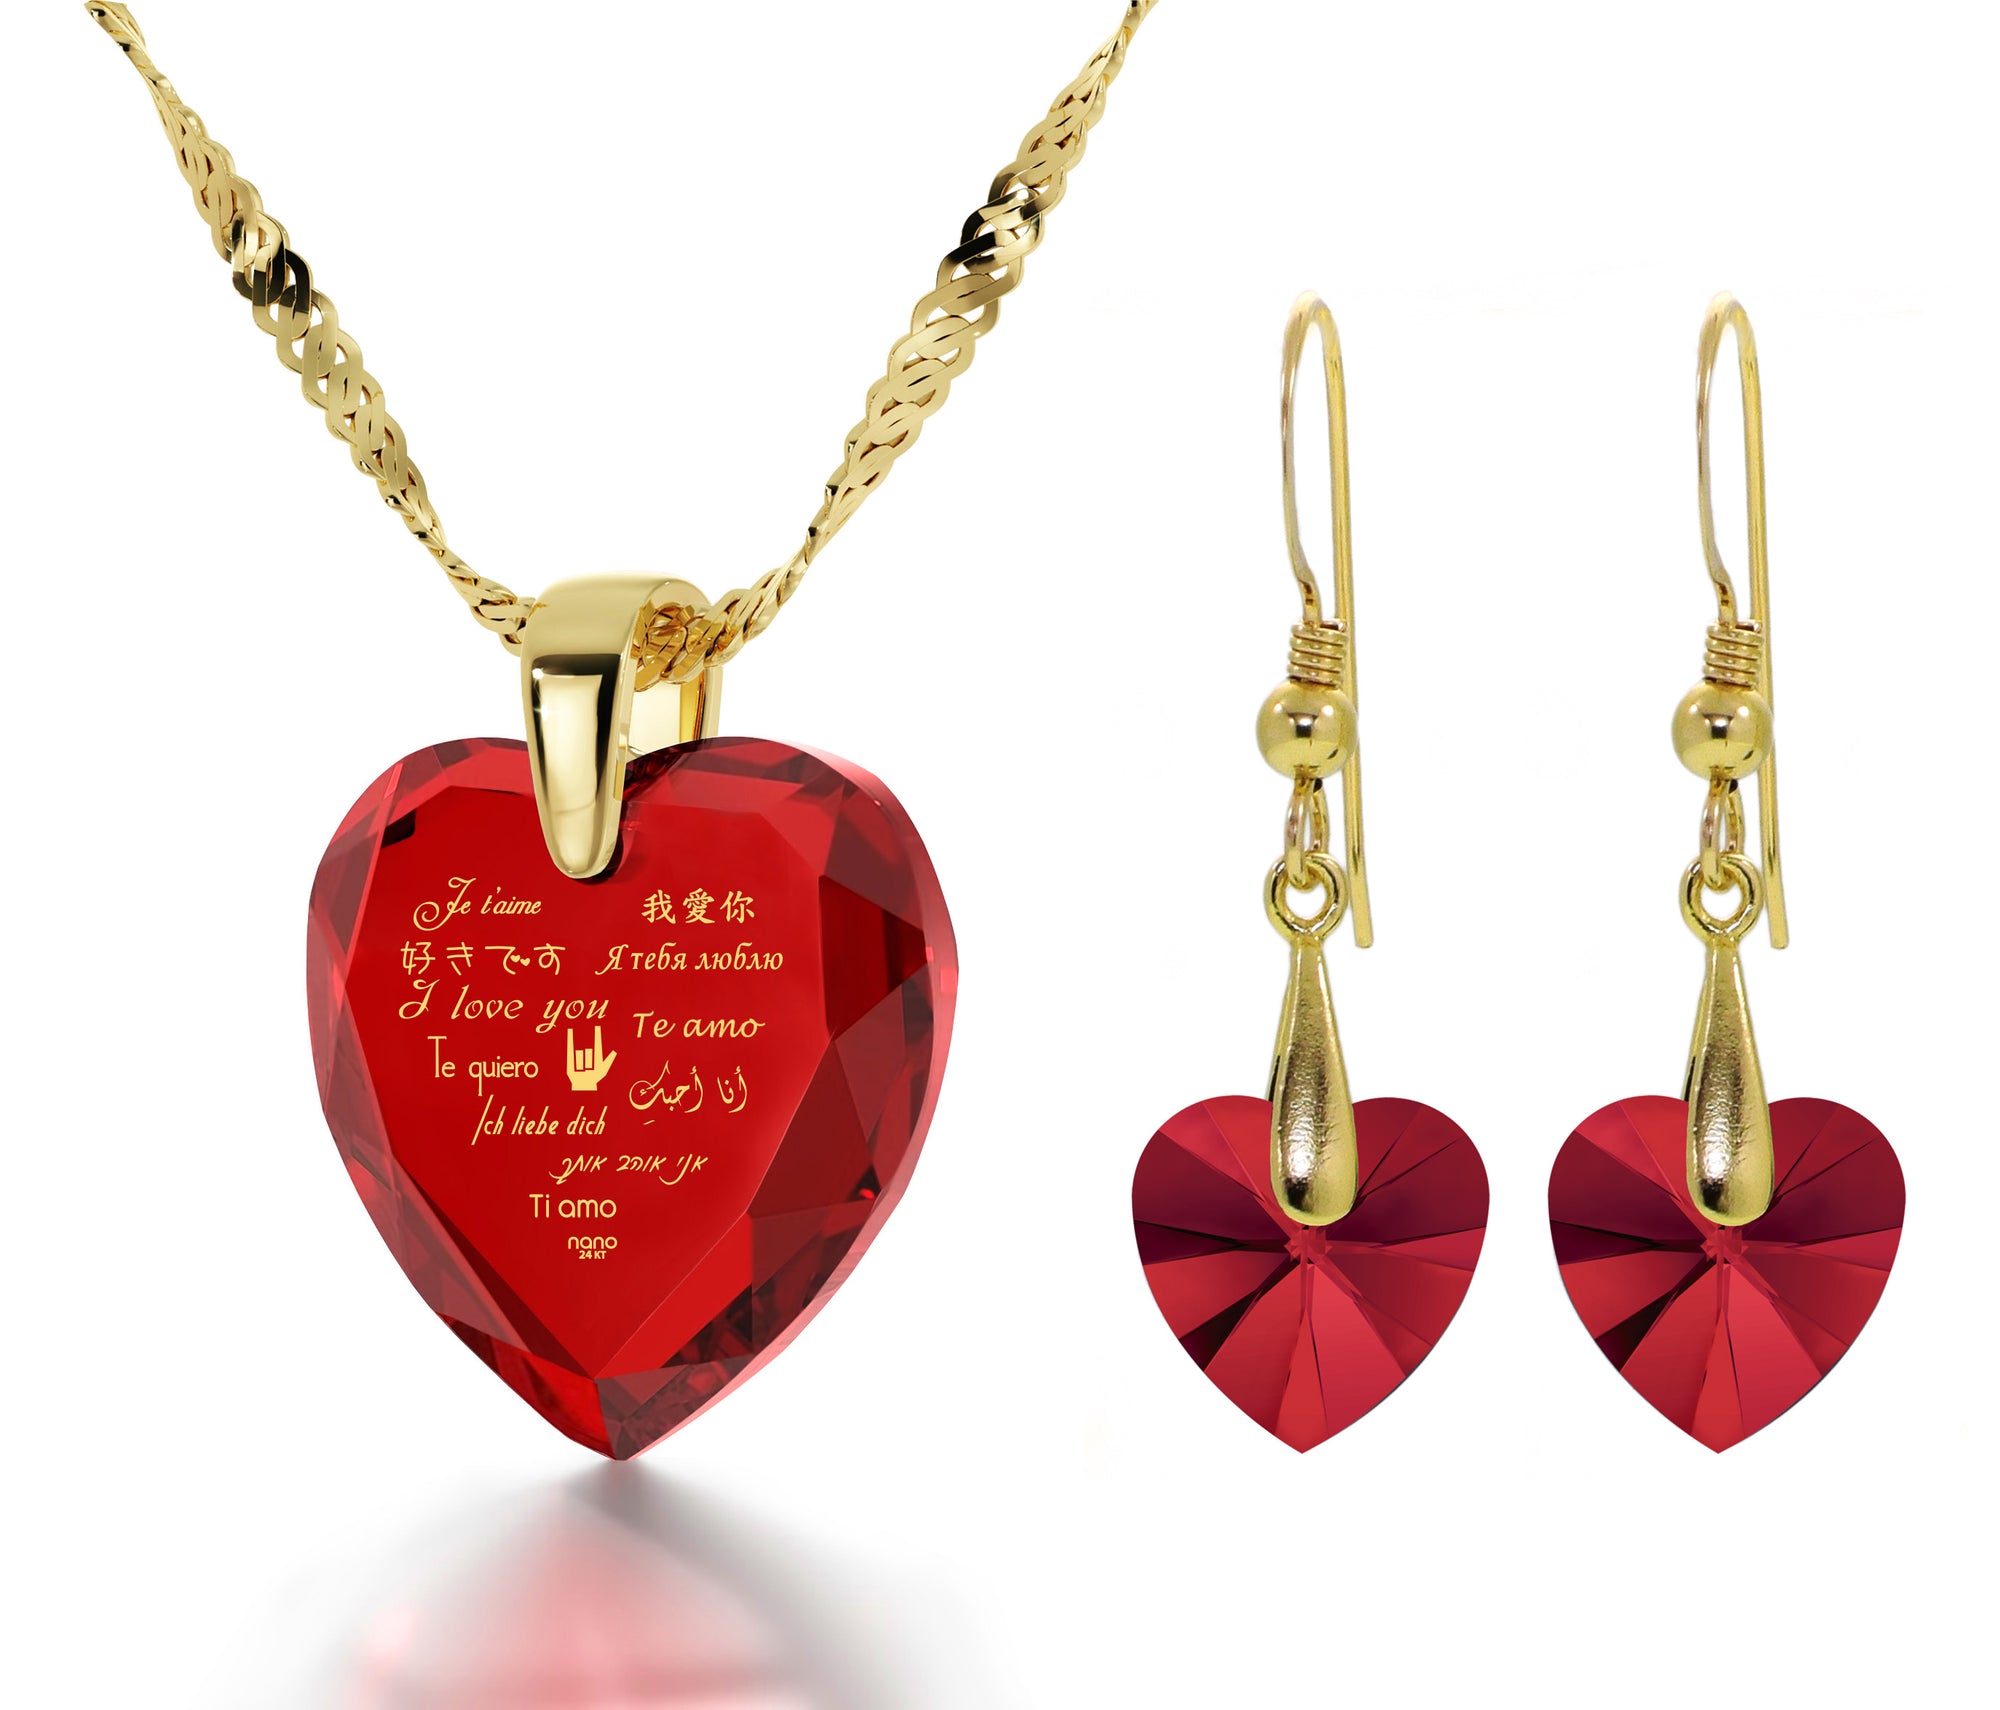 Red Heart Bridal Jewelry Set With Zircon Designs Silver Heart Pendant  Necklace And Earrings For Girls And Women In Purple, White, And Silver  Chain From Shmily2019, $2 | DHgate.Com